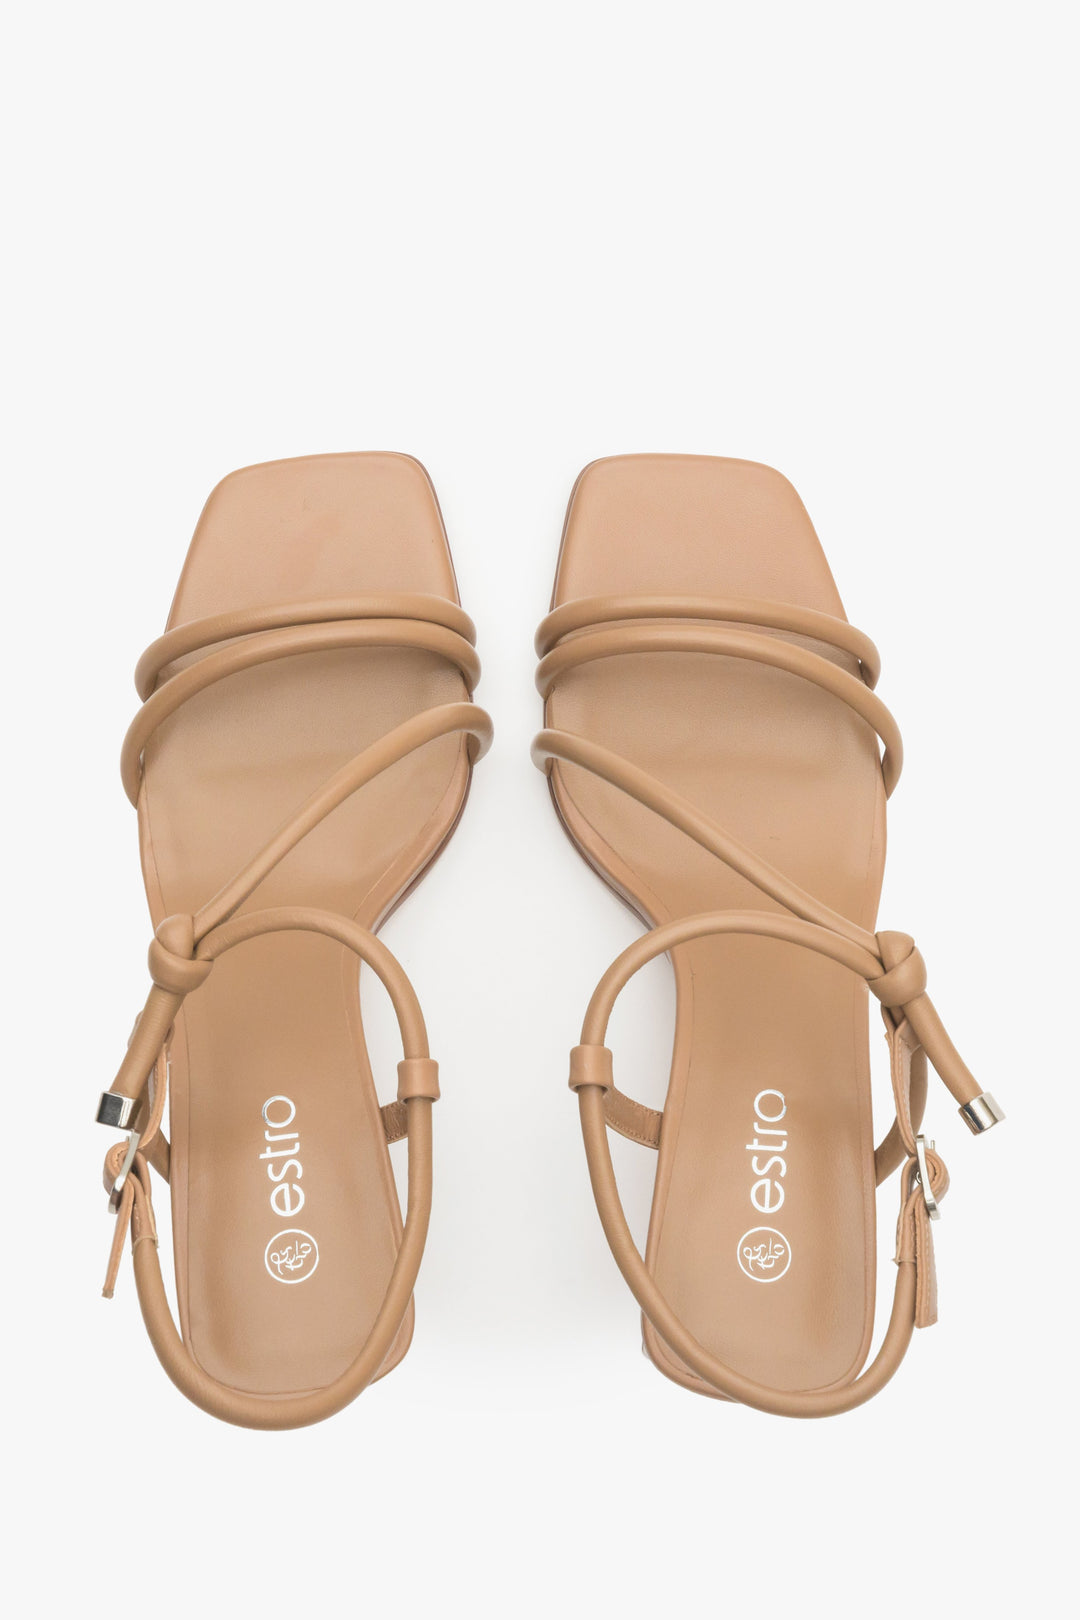 Women's strappy sandals in light brown on a block heel - presentation of the footwear from above.